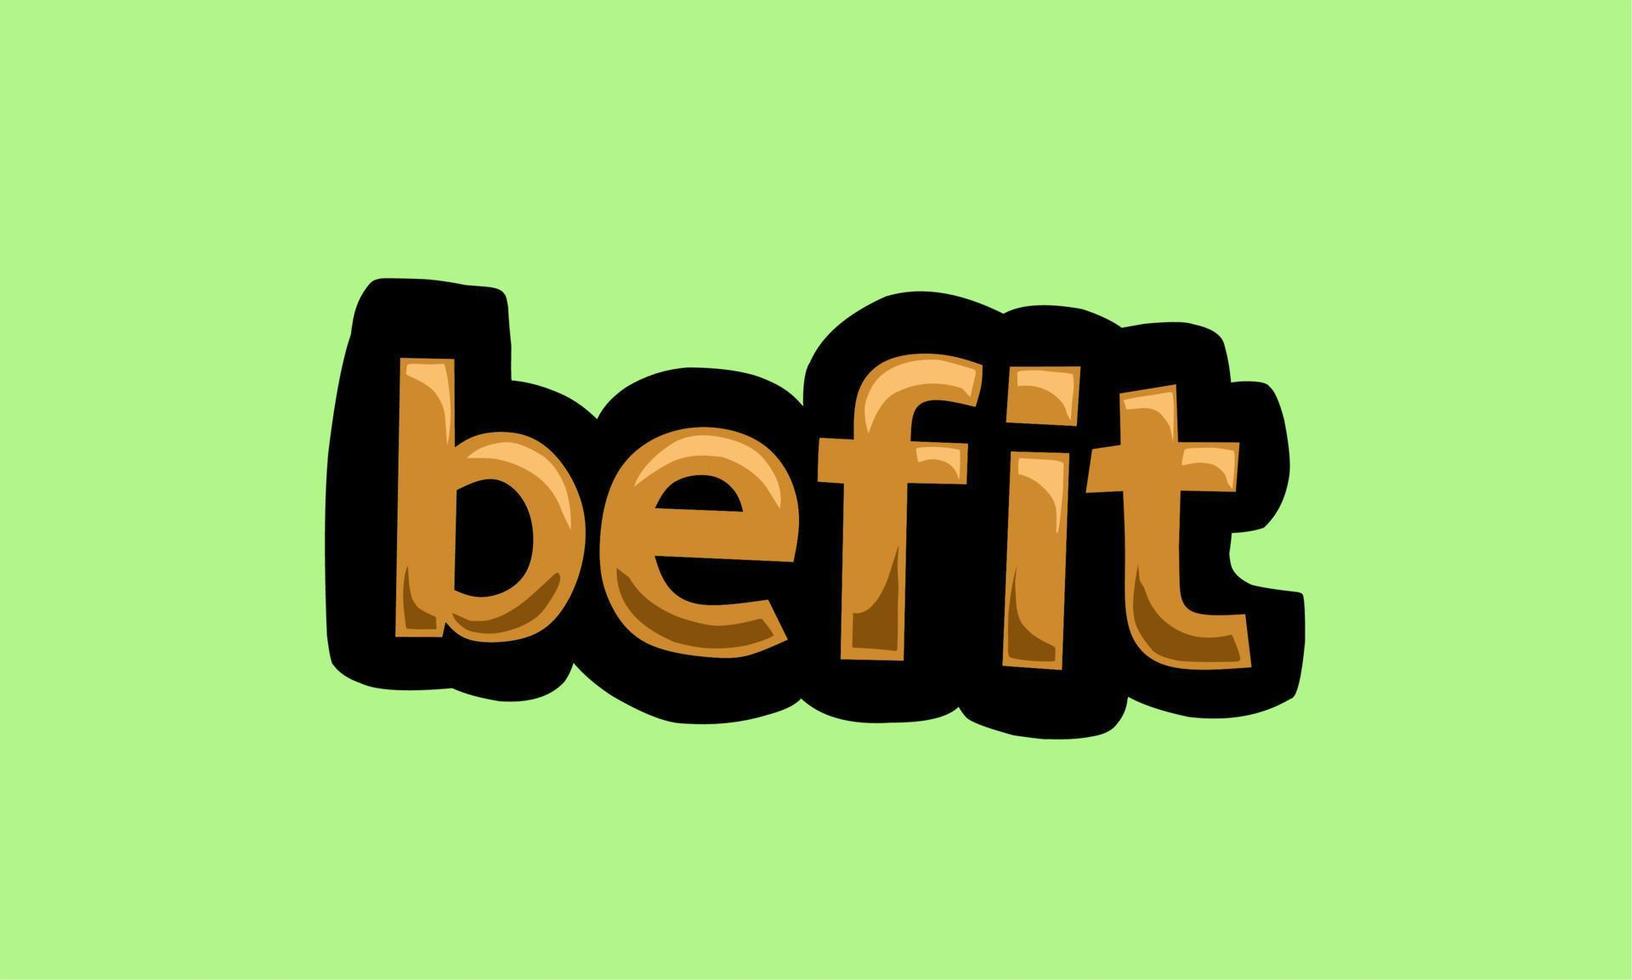 befit writing vector design on a green background